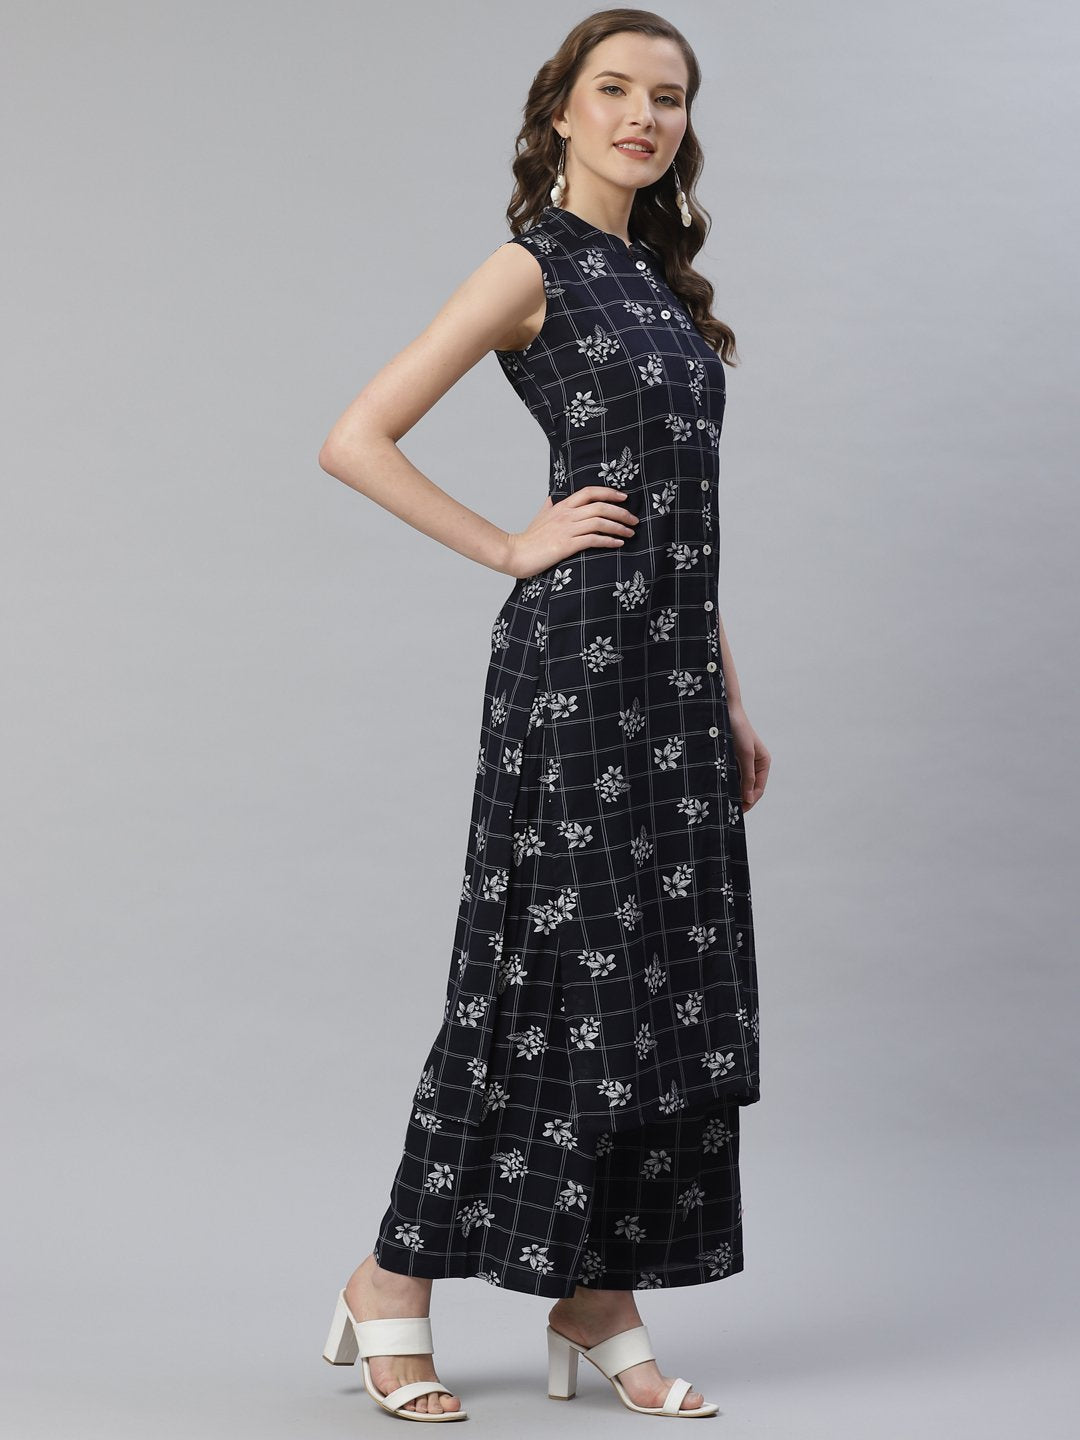 Women's Black & White Floral Printed Kurta with Palazzos - Jompers